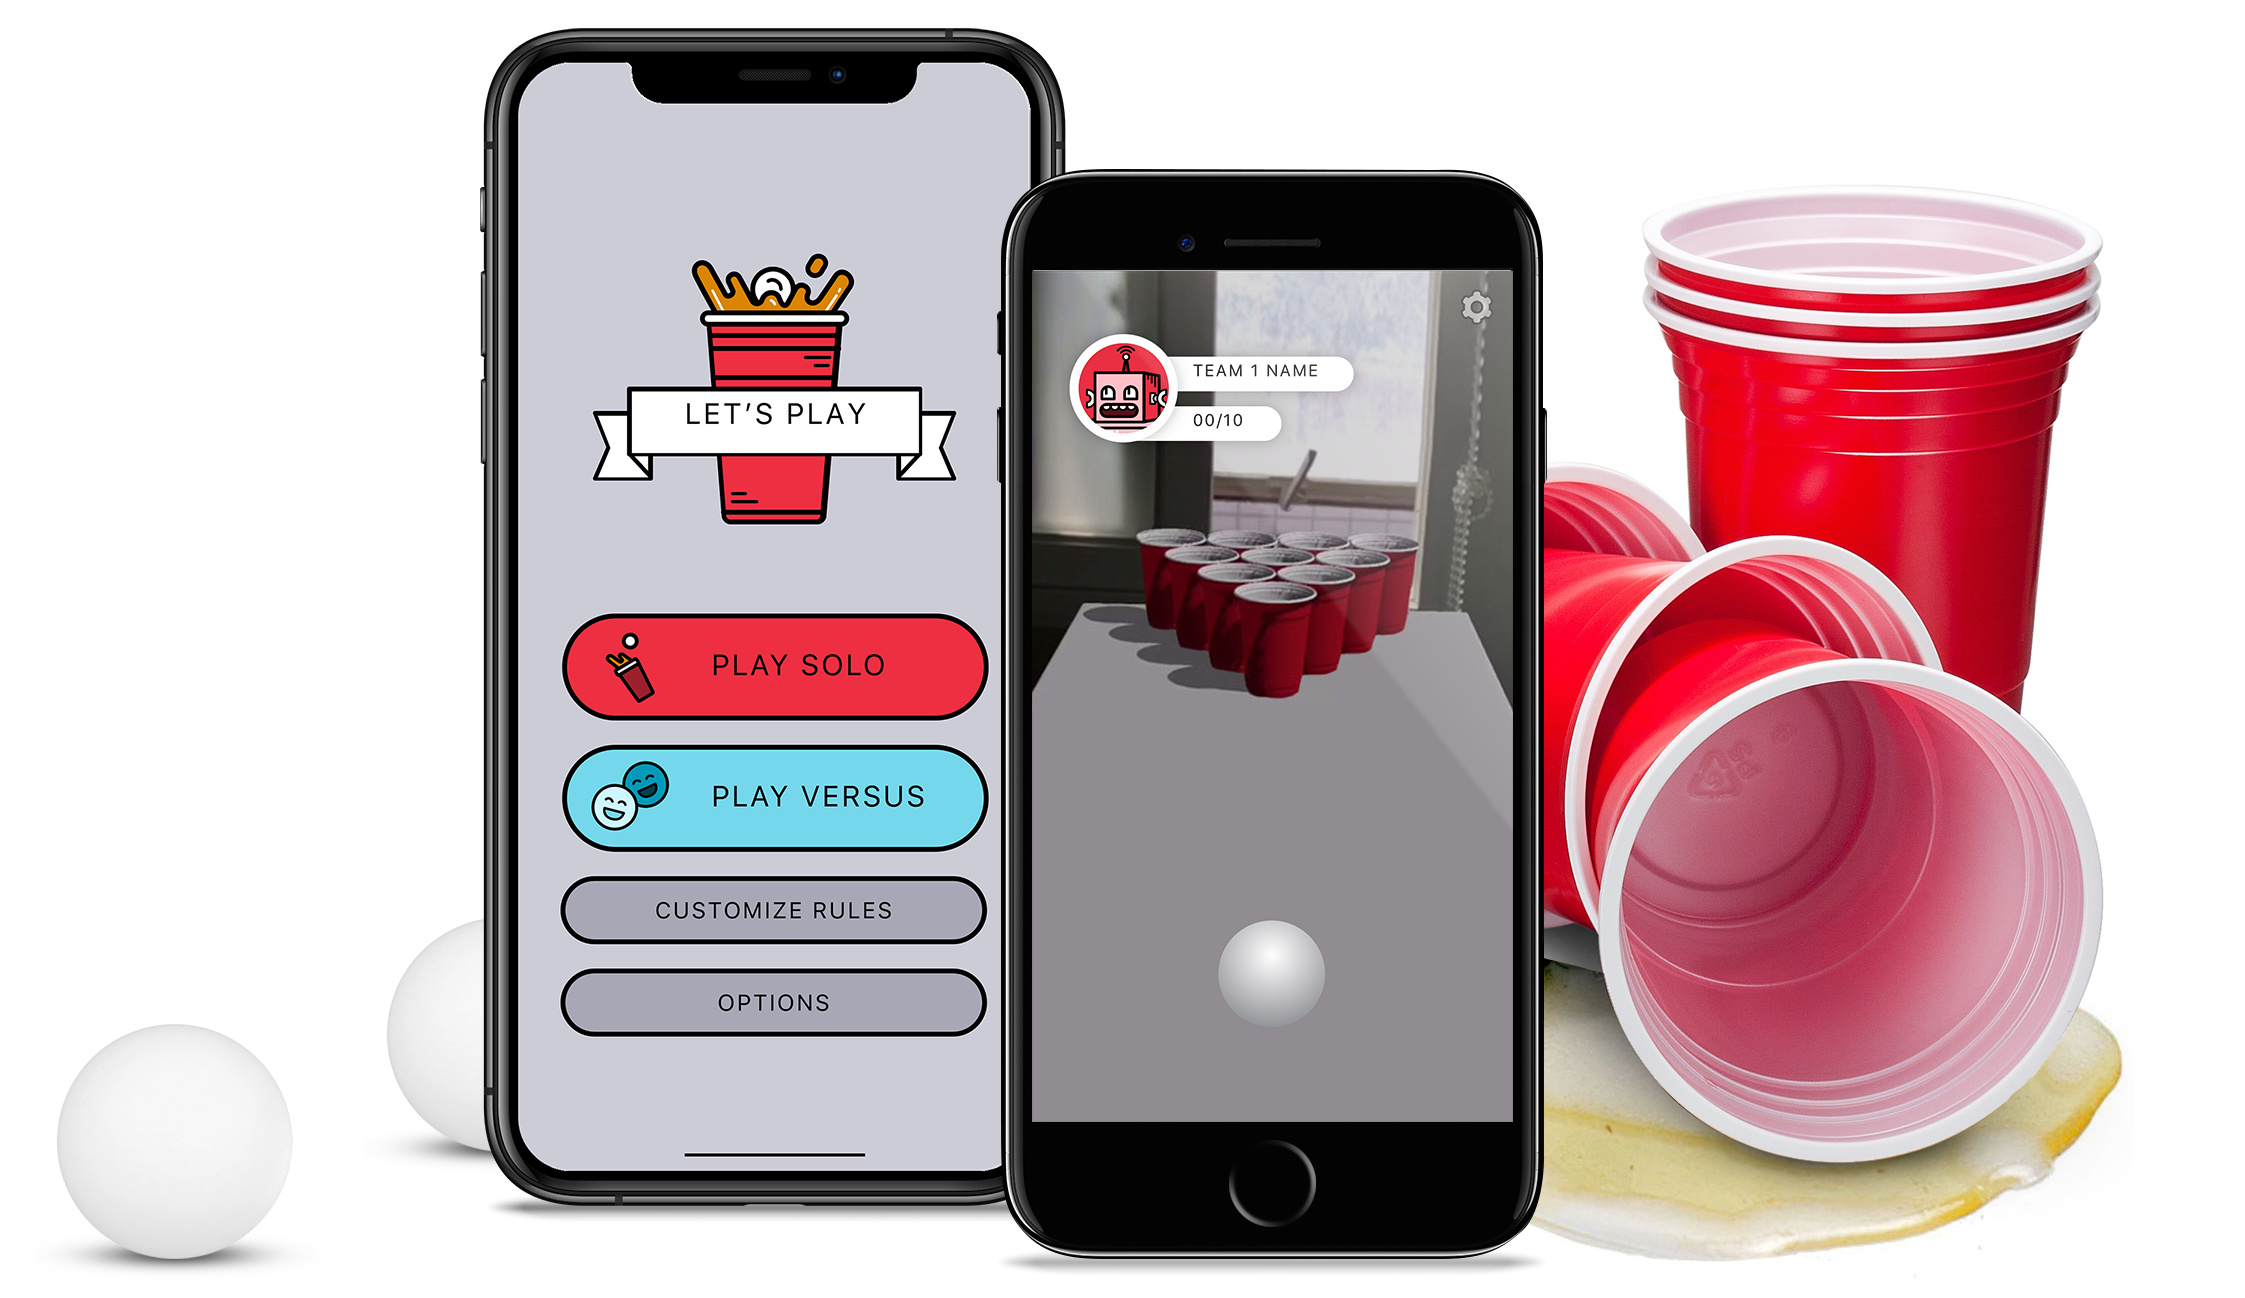 beer pong AR app on a phone with pingpong balls and red plastic cups